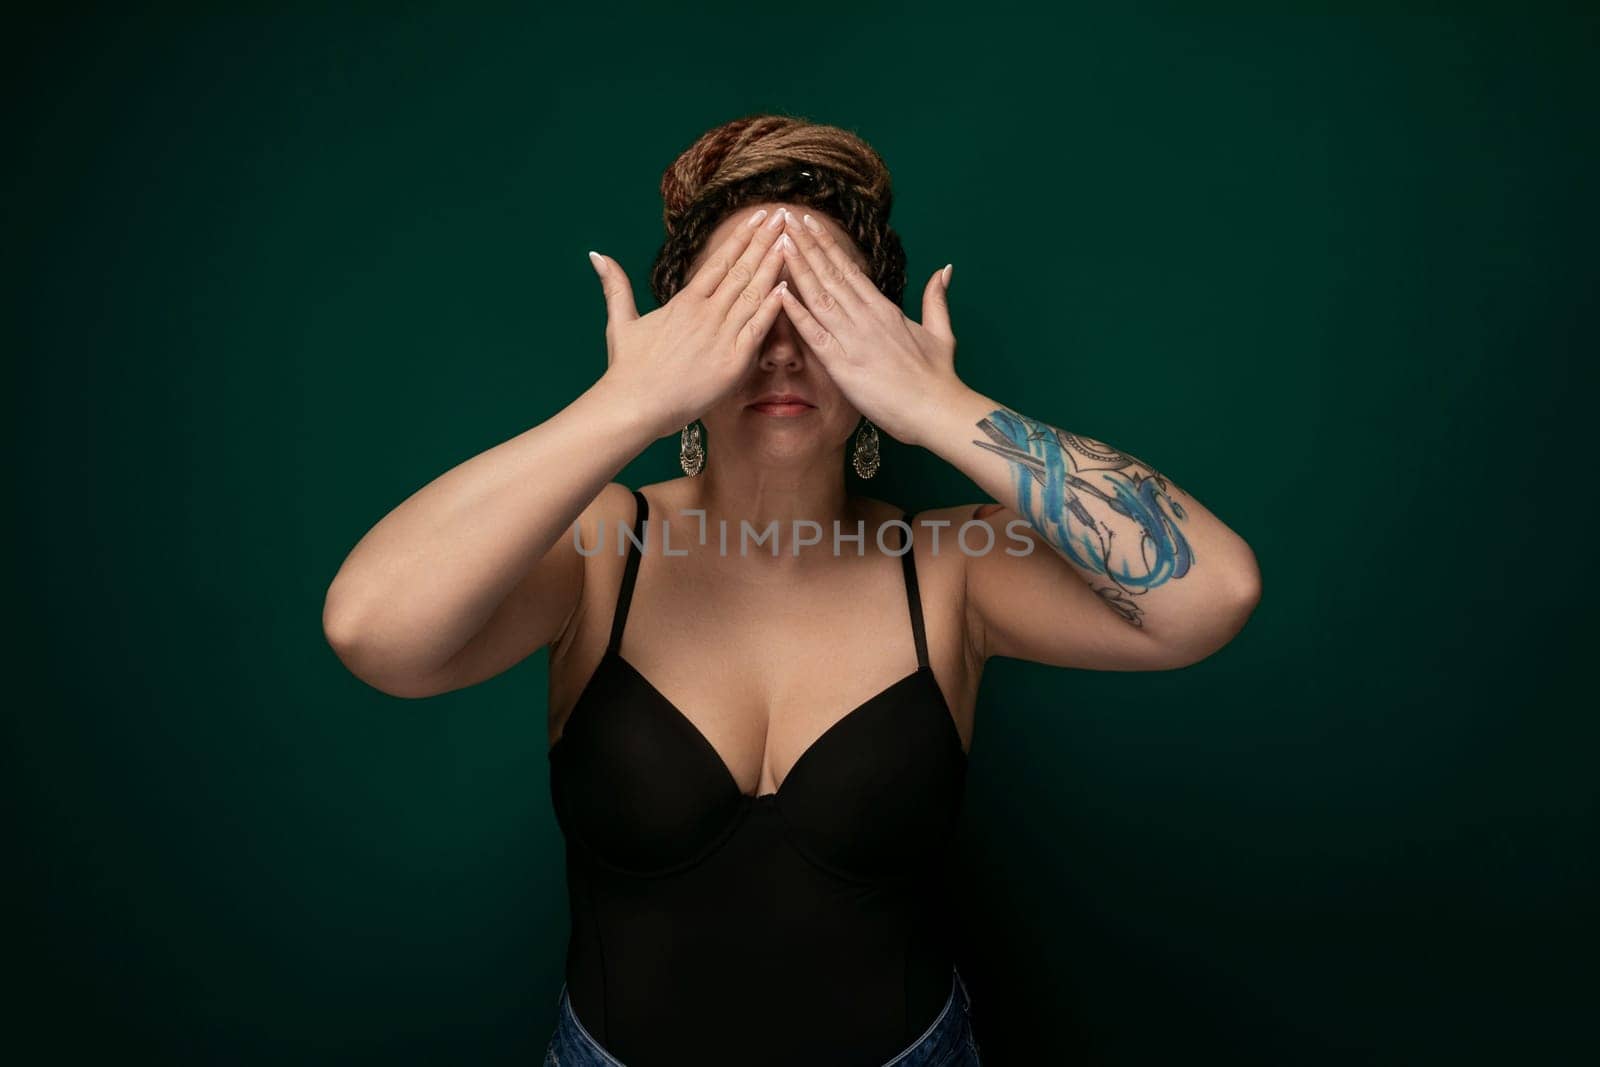 A woman sitting with her hands covering her eyes in a gesture of blocking out light or shielding herself from a bright or overwhelming situation. She appears to be seeking privacy or taking a moment to collect her thoughts.